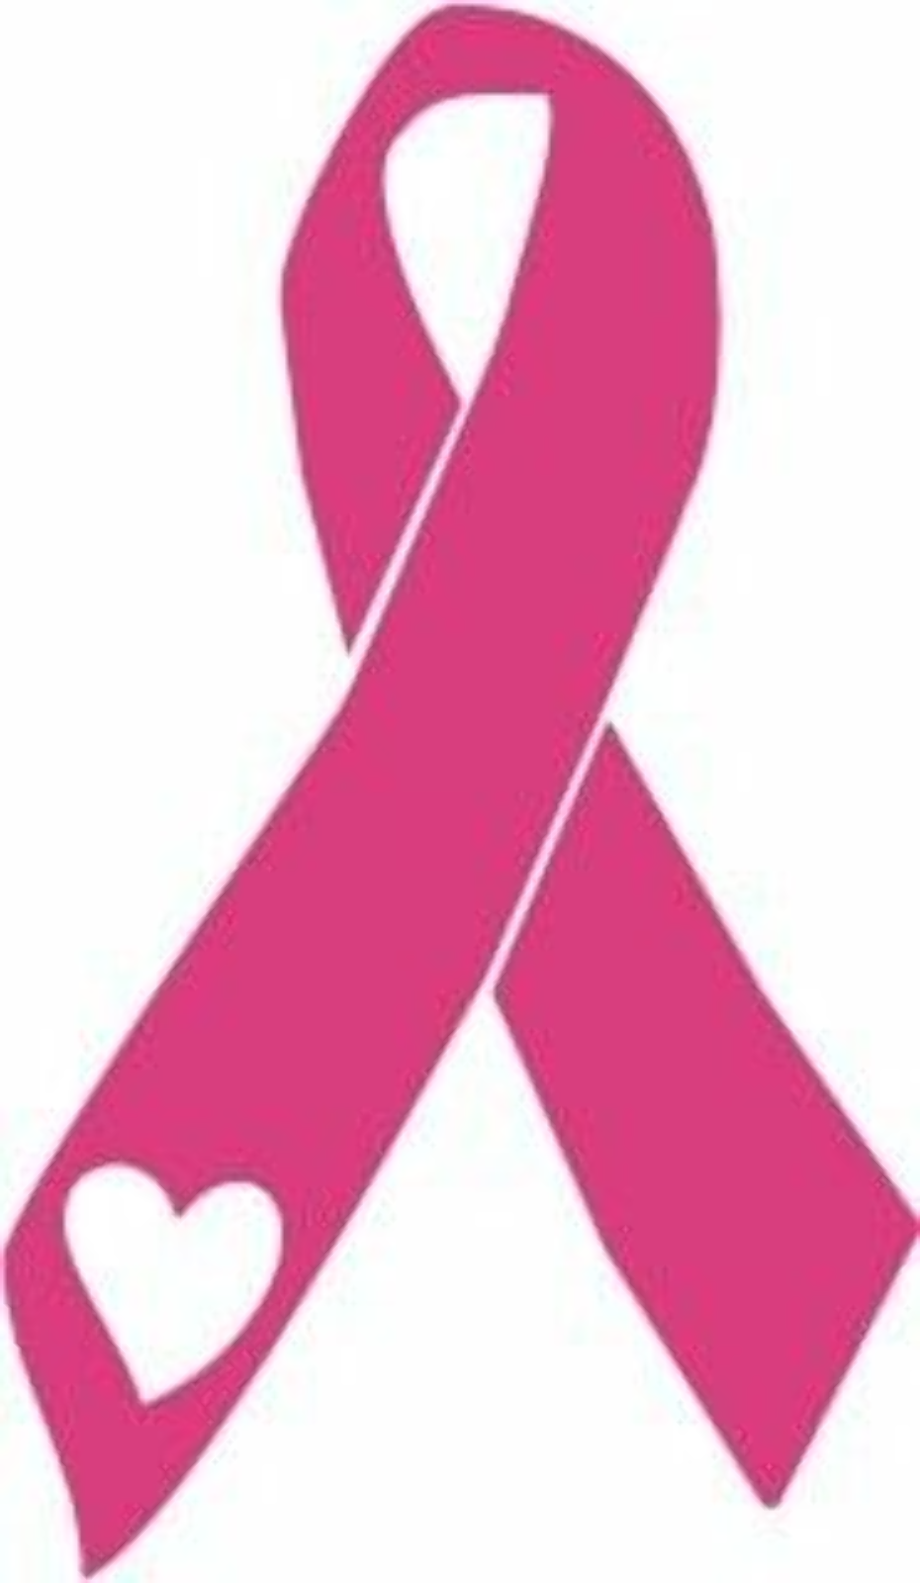 cancer ribbon clipart silhouette